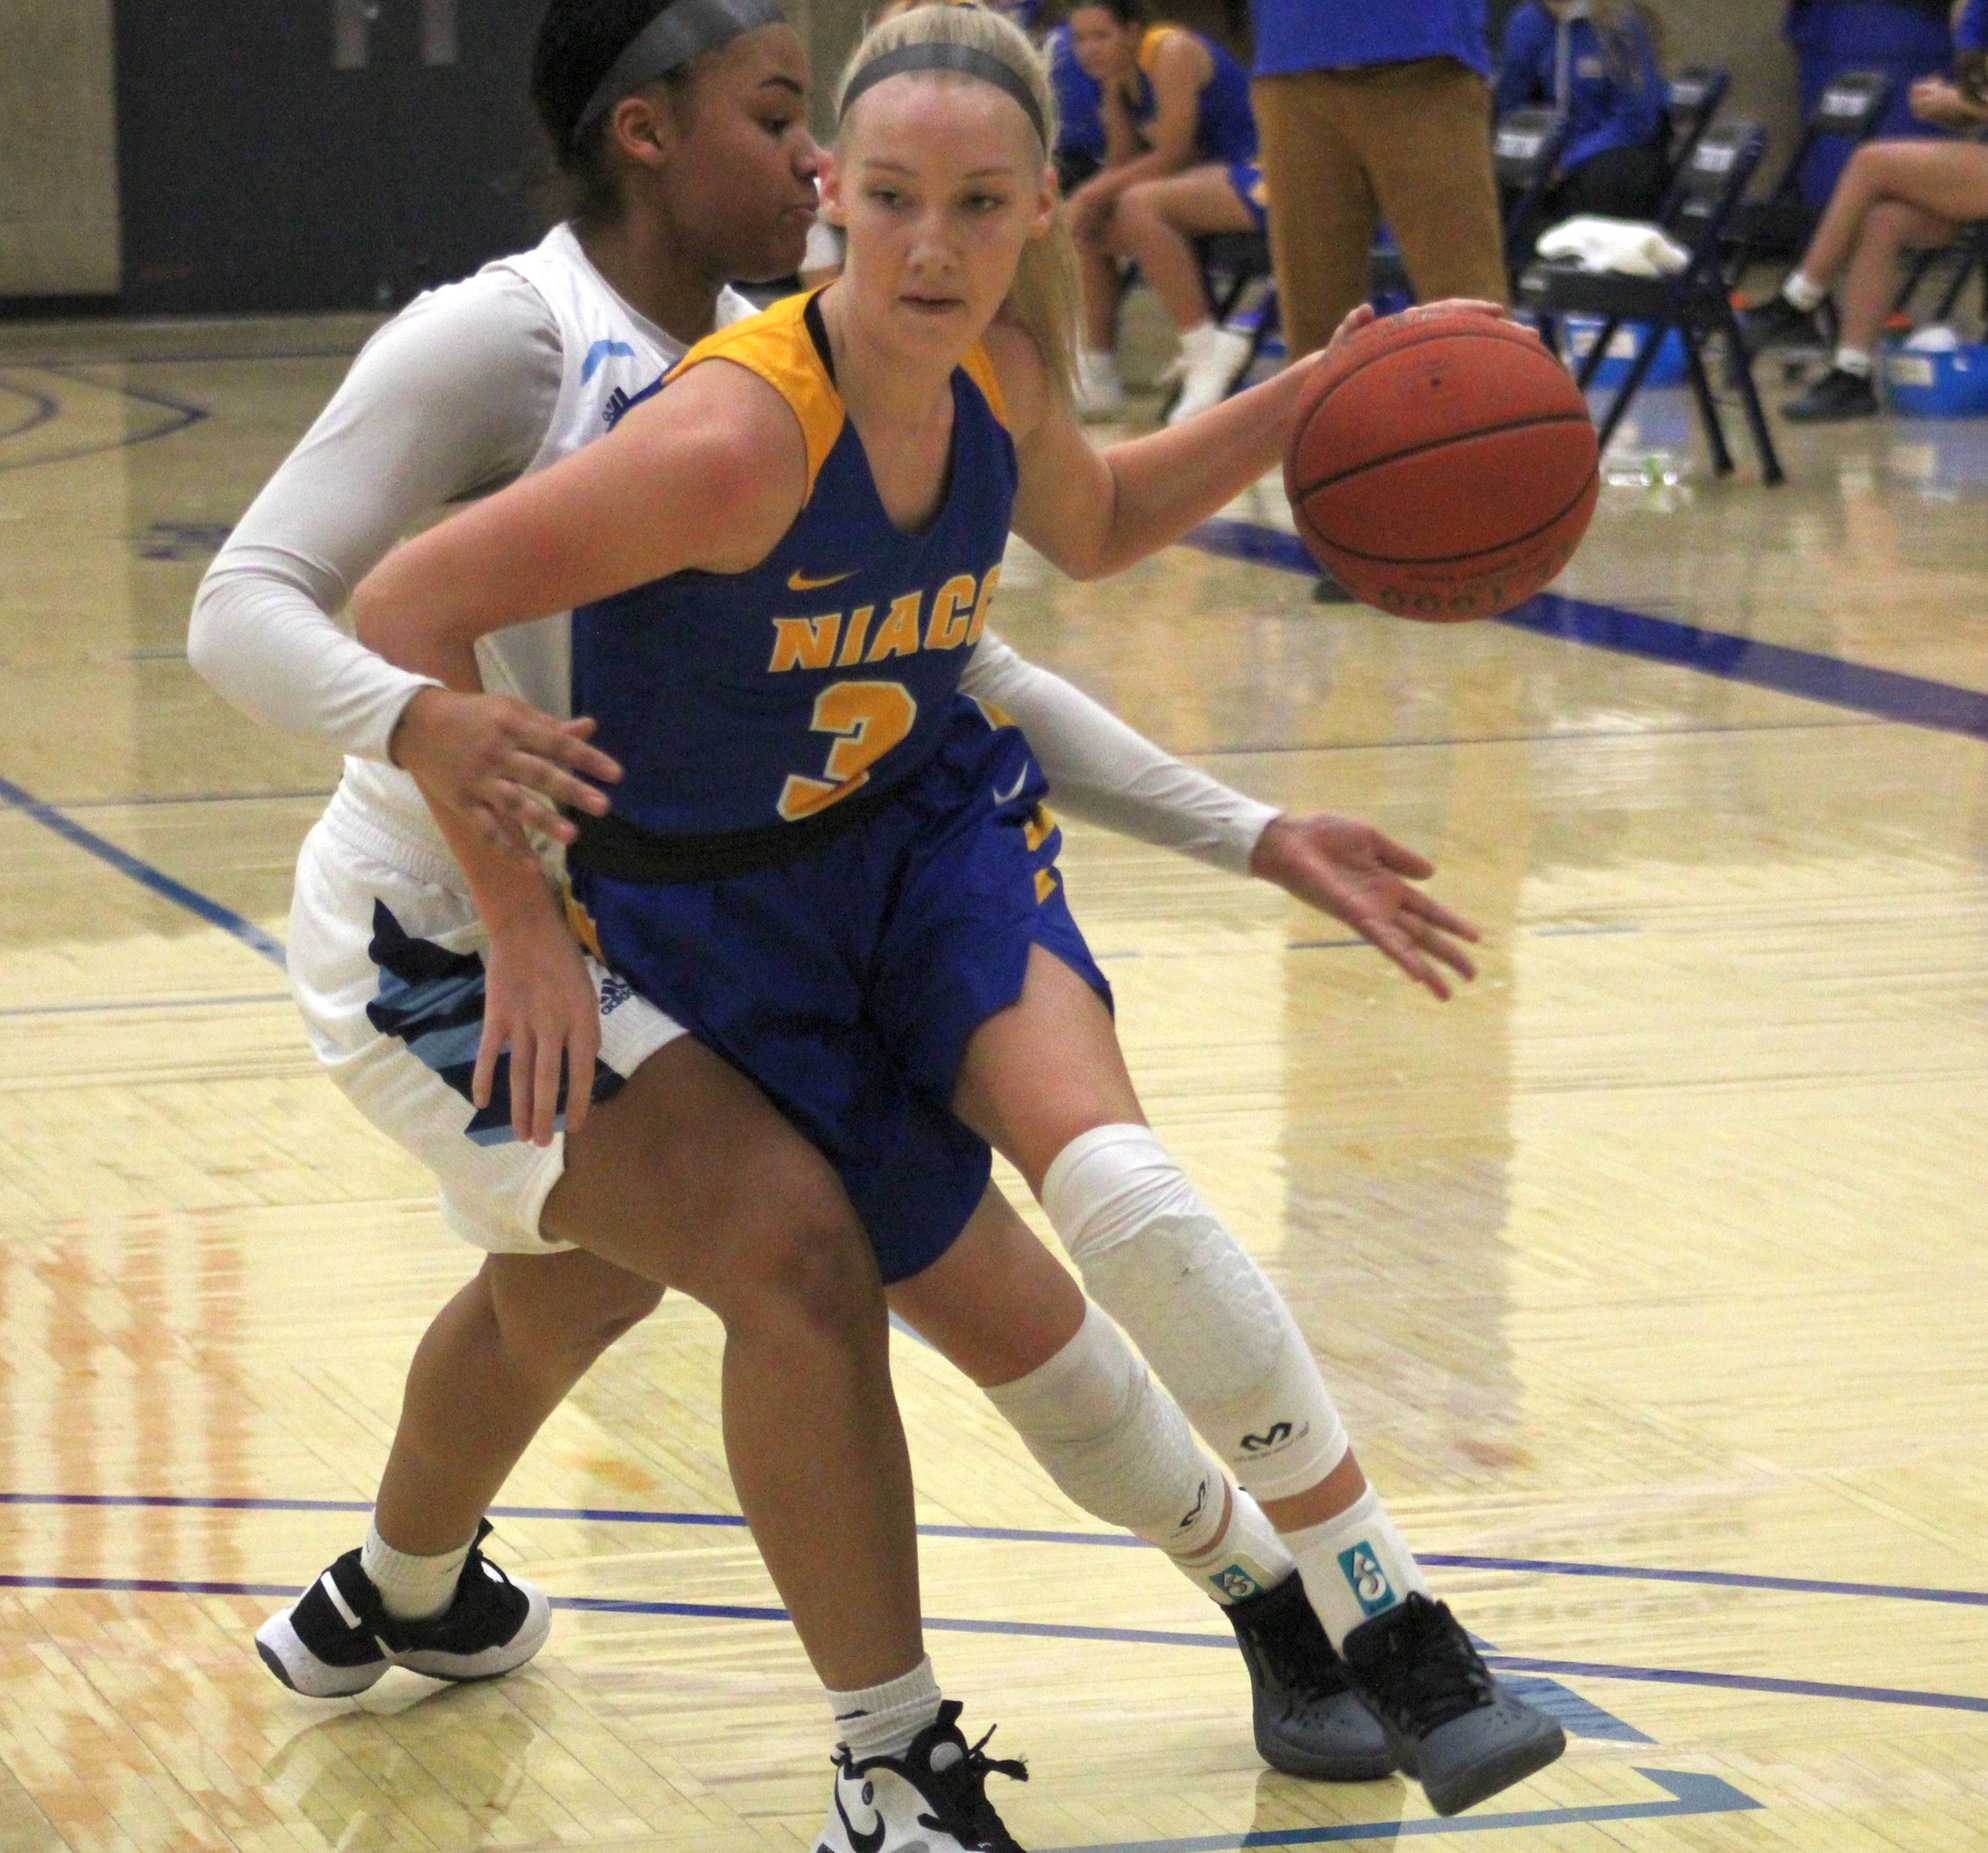 NIACC's Courtney Miller drives to the basket during Wednesday's game against Iowa Central.